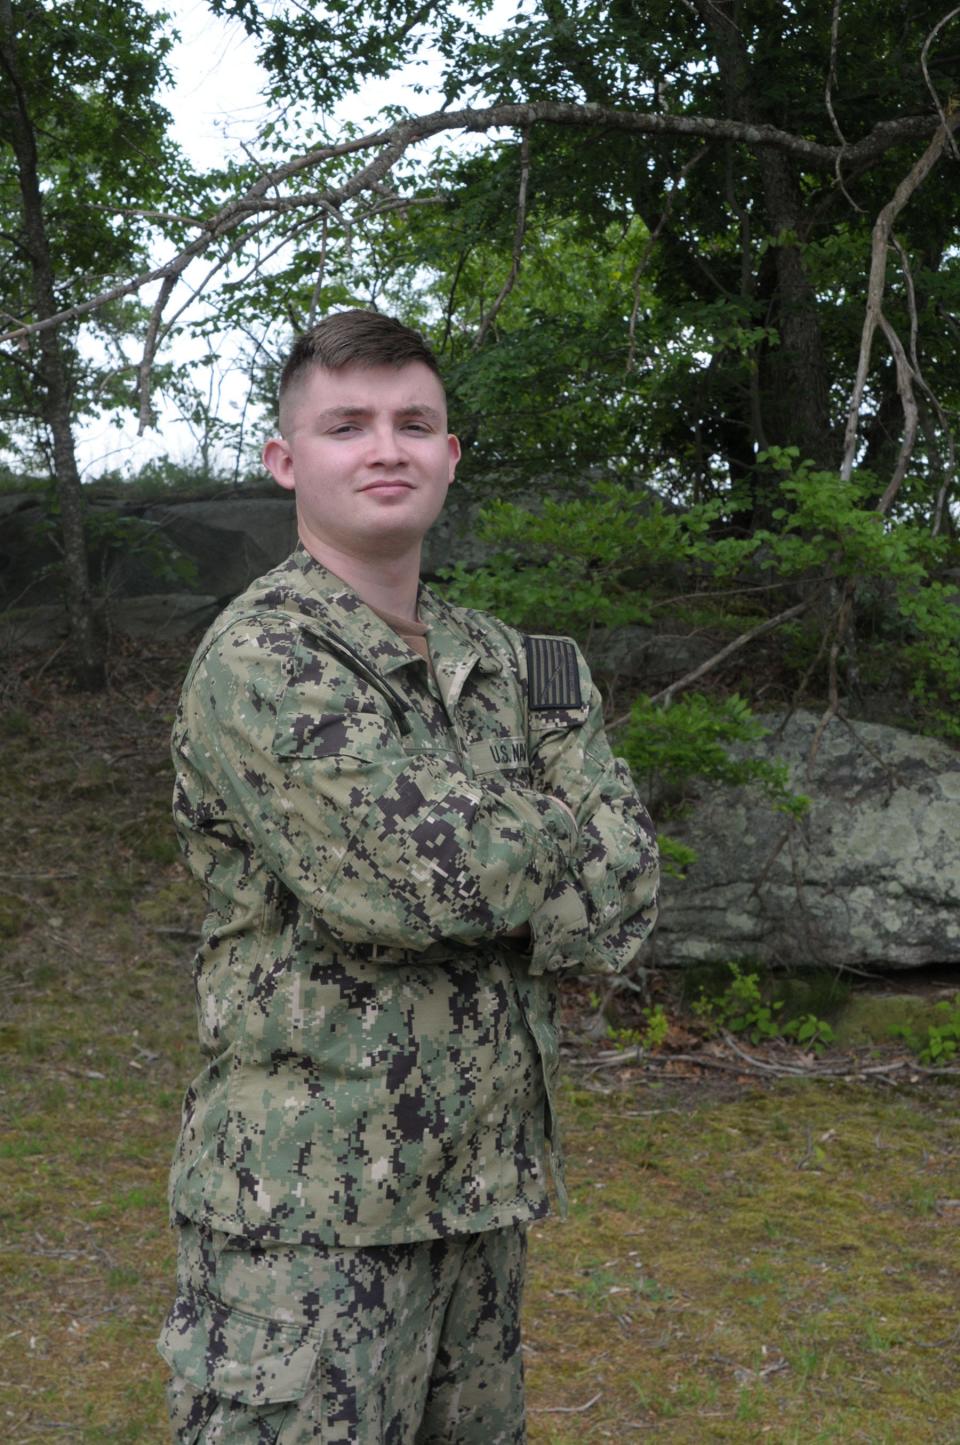 As a student at Navy Submarine School, Seaman Morgan Bryant is learning what is needed to operate aboard submarines so they can successfully complete missions around the world.